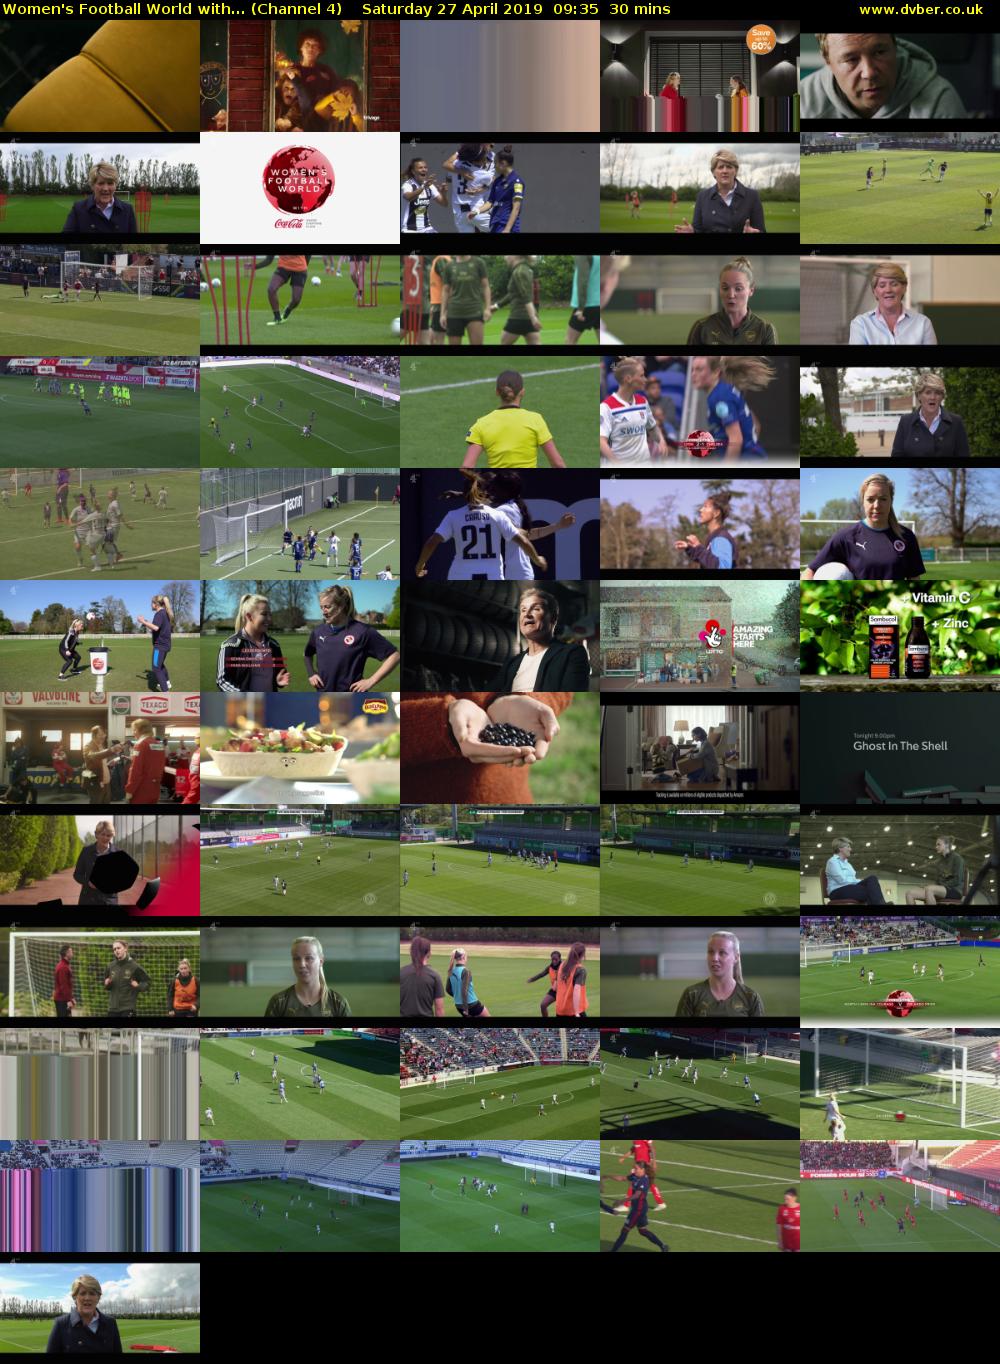 Women's Football World with... (Channel 4) Saturday 27 April 2019 09:35 - 10:05